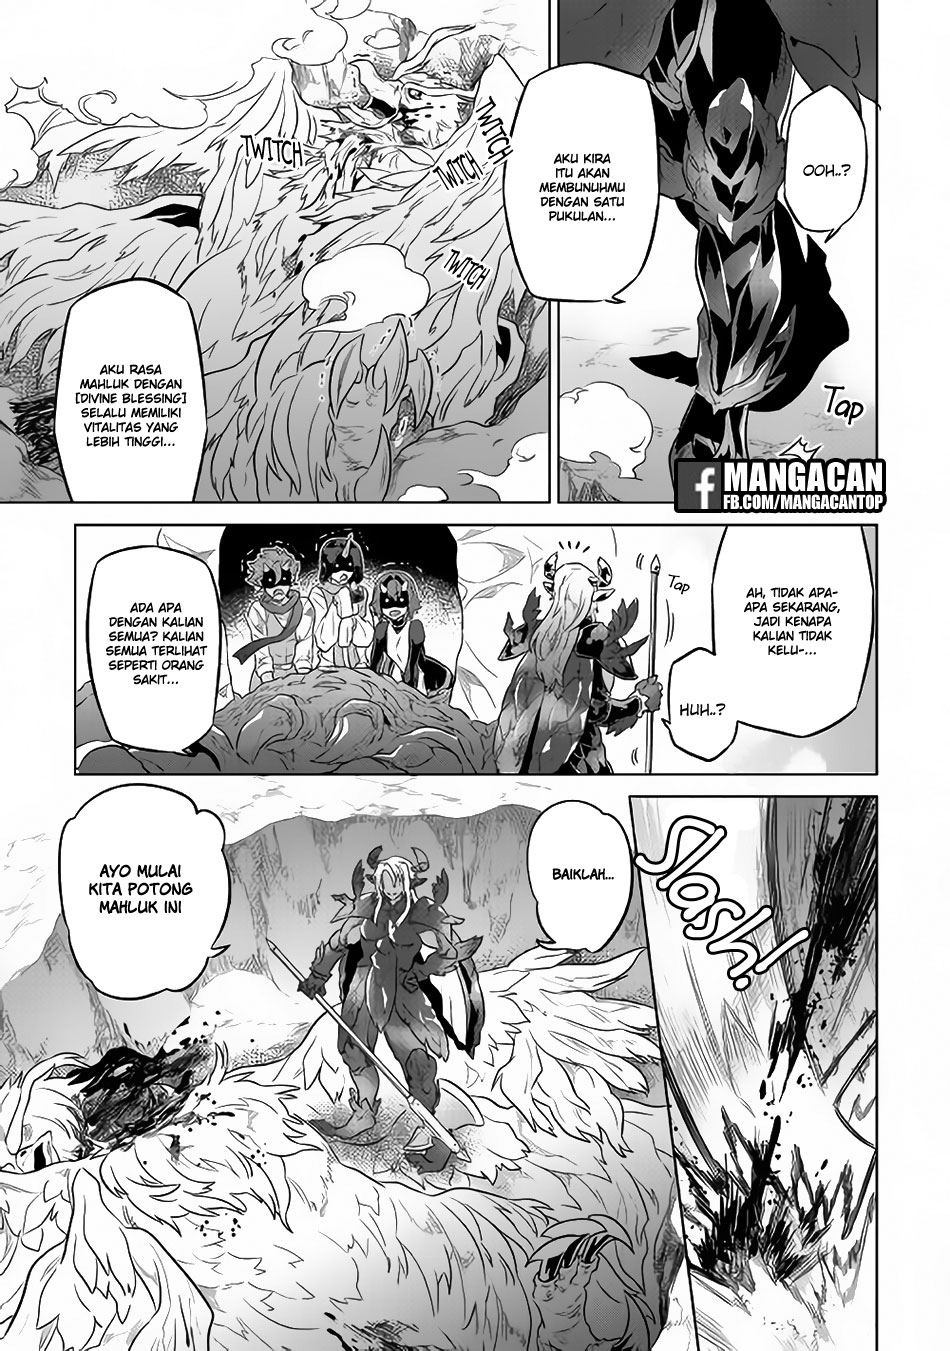 Re:Monster Chapter 39-2